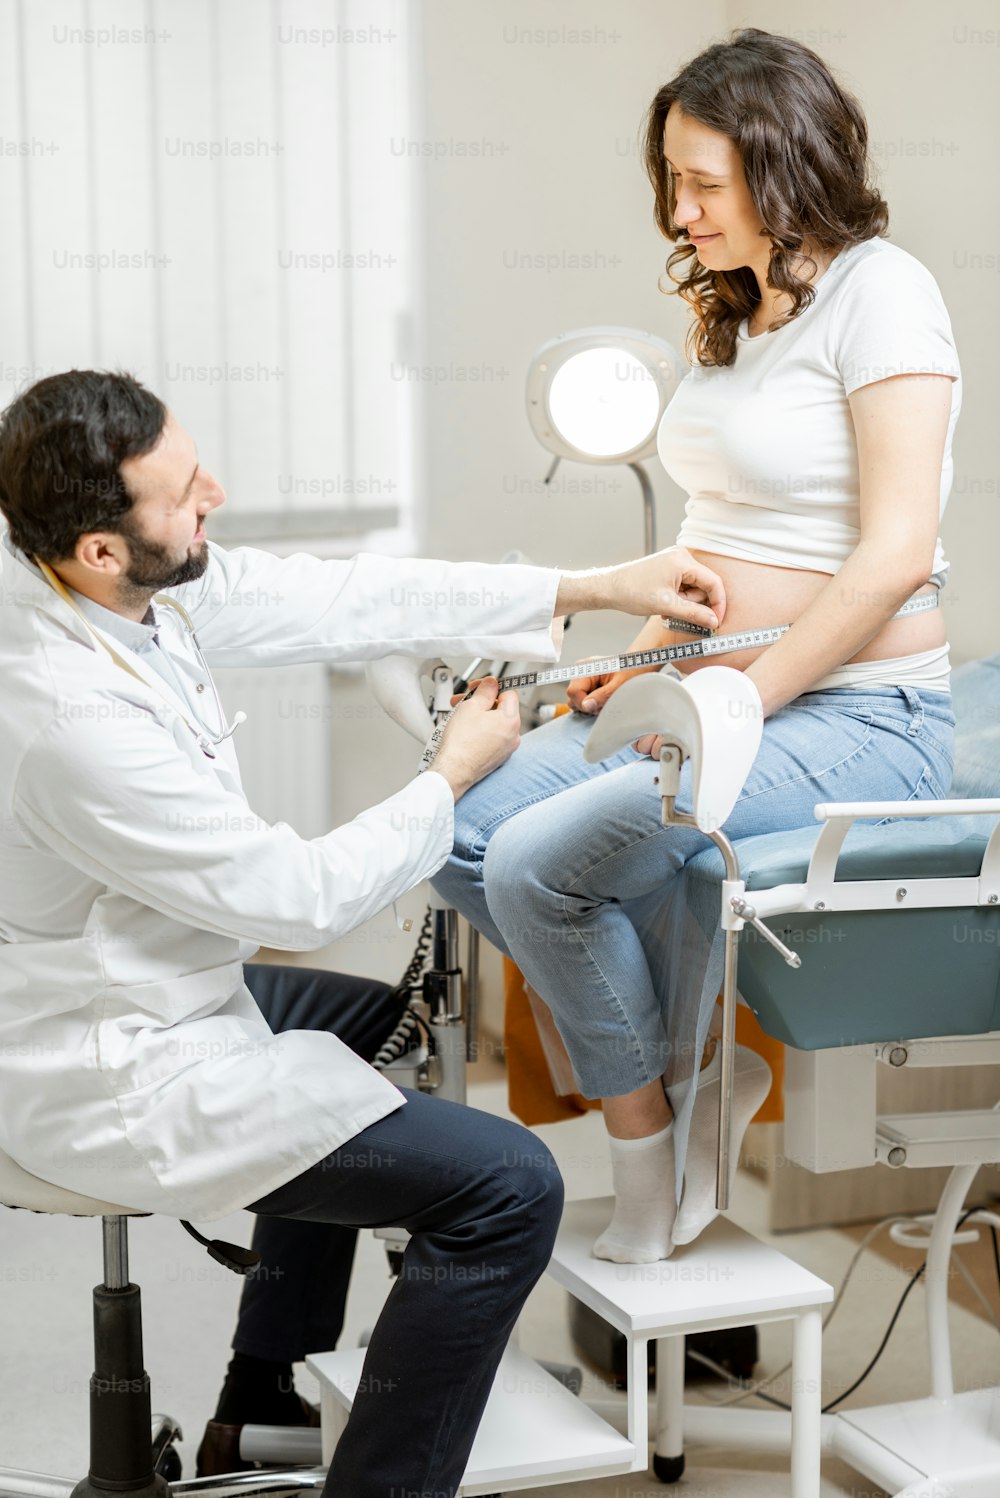 Male doctor measuring pregnant woman's belly with a tape during a medical examination in the office. Concept of medical care and health during a pregnancy